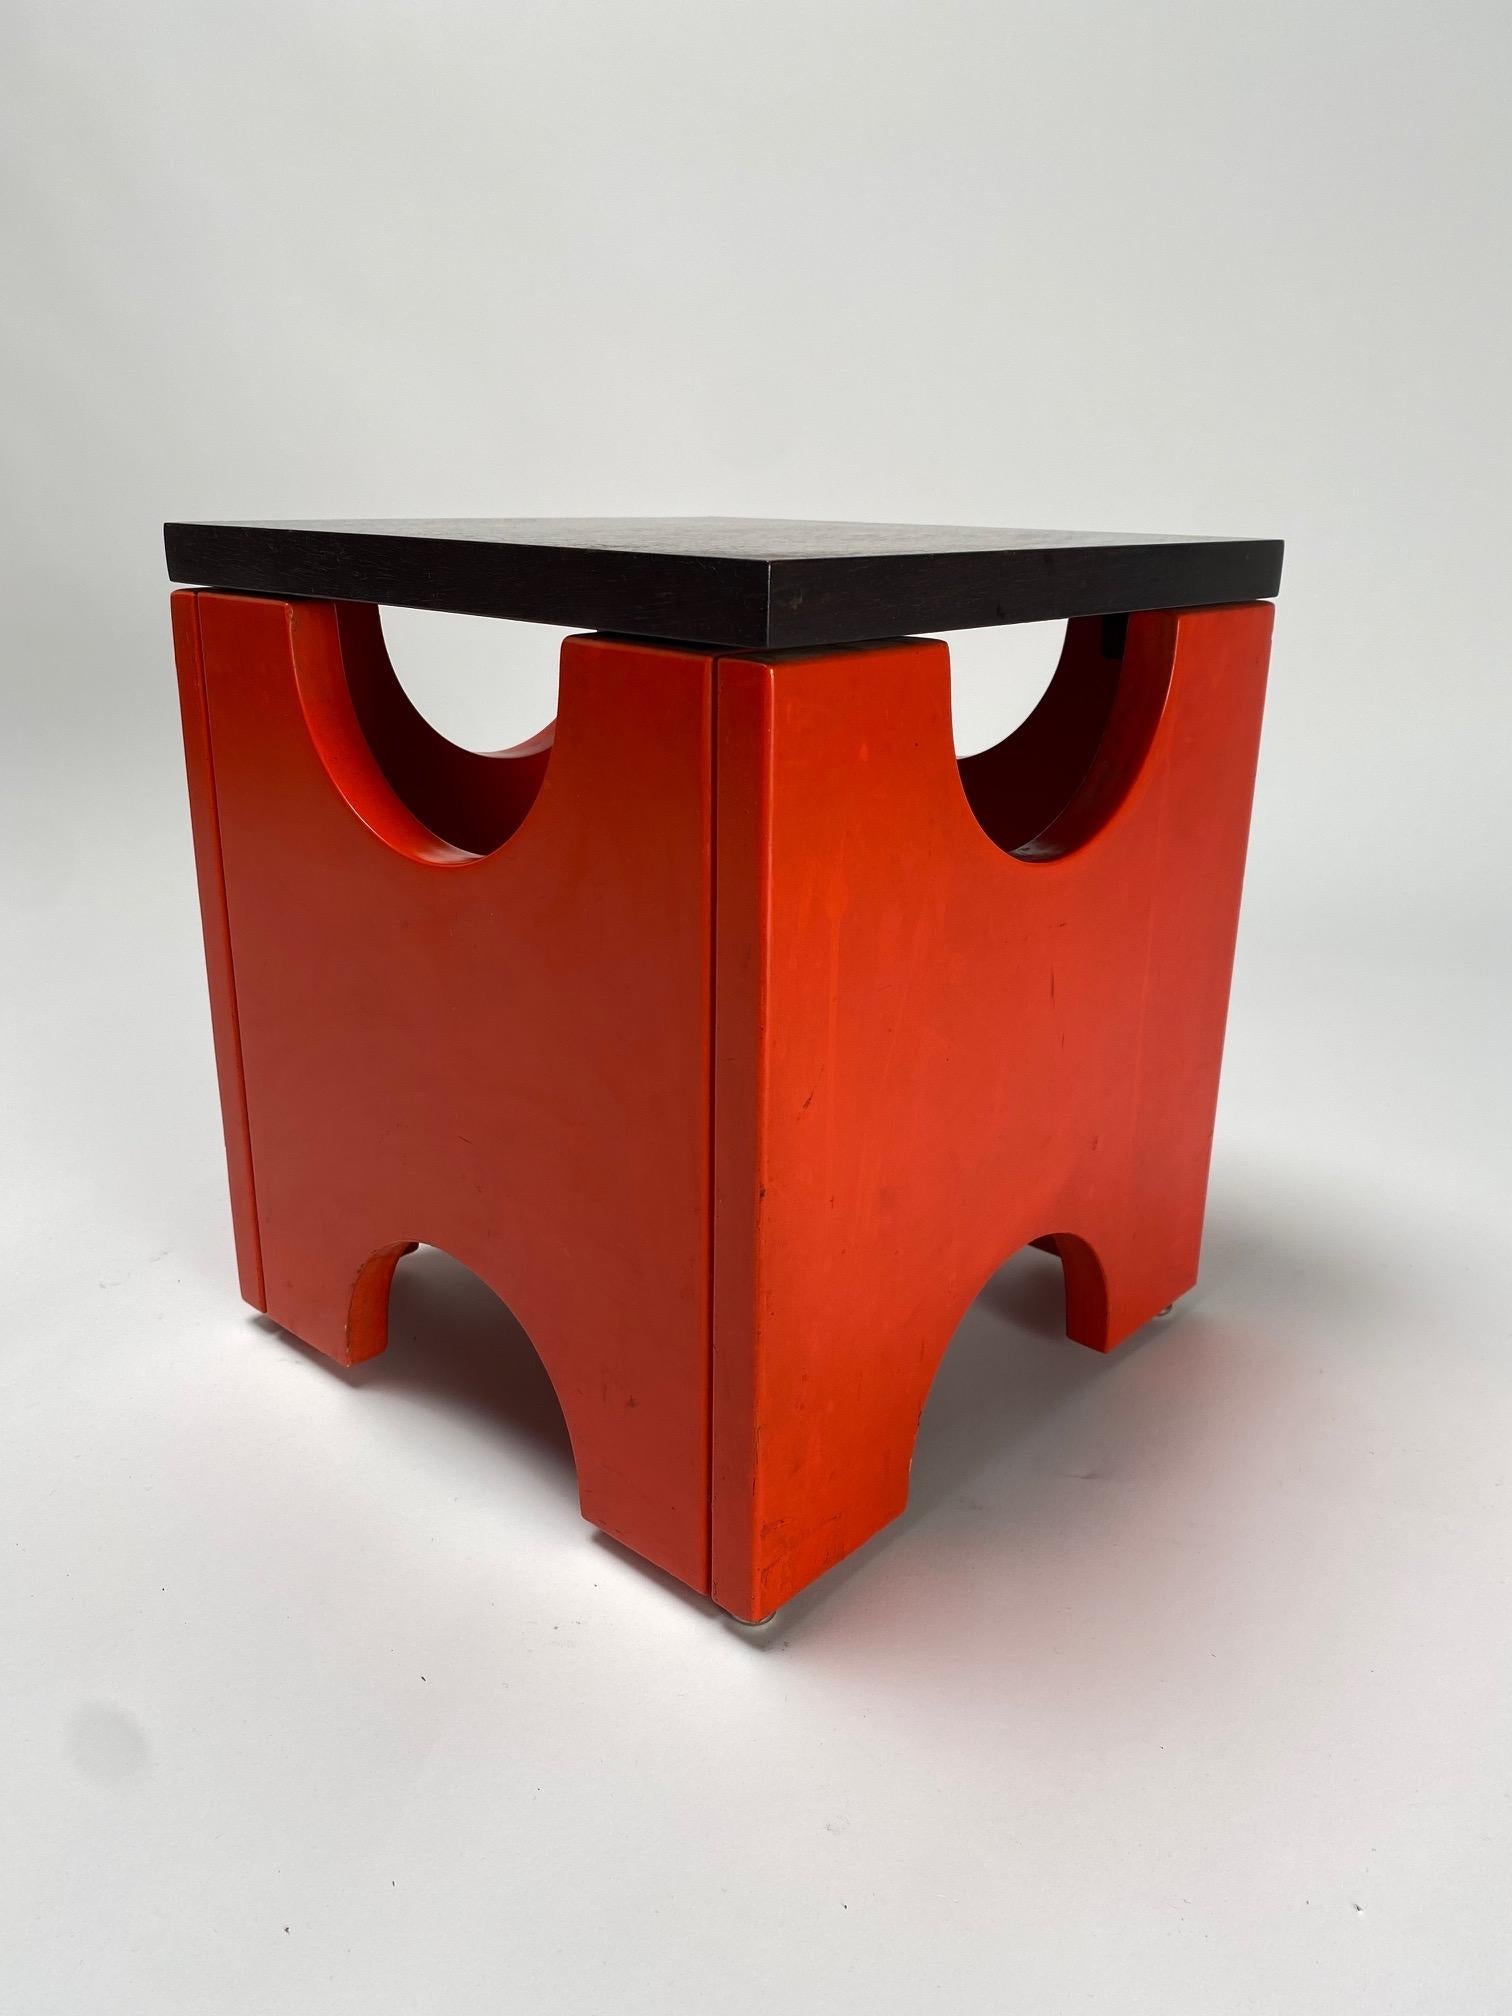 Ettore Sottsass, Dado T29 stool, Poltronova production, Italy, 1960s

  It is one of the most iconic works by the famous Italian architect and designer Ettore Sottsass. The wooden base is painted red, with a plain walnut top. Below there are four